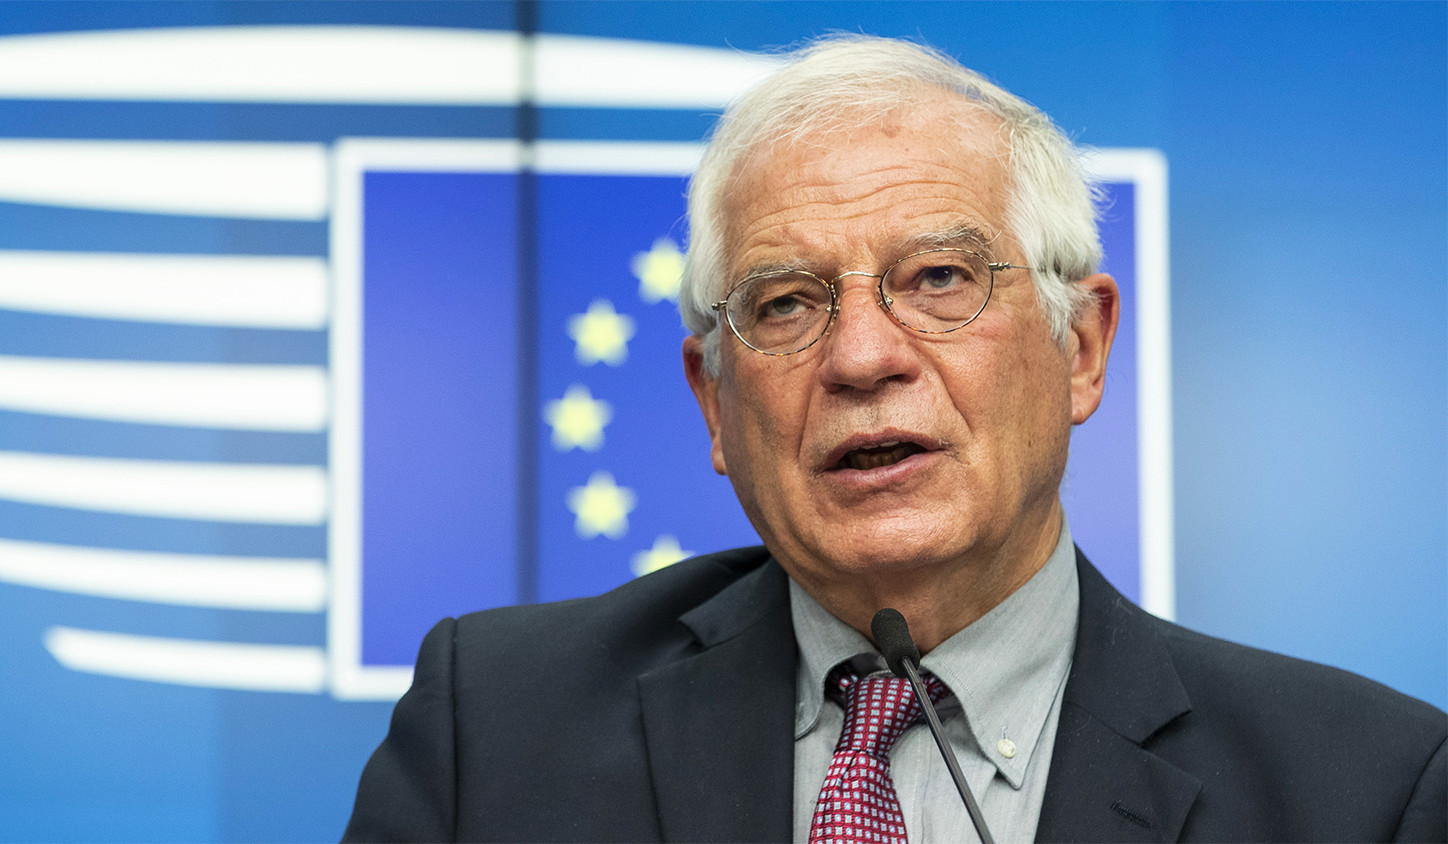 EU, West supporting Ukraine based on its own interests, Borrell